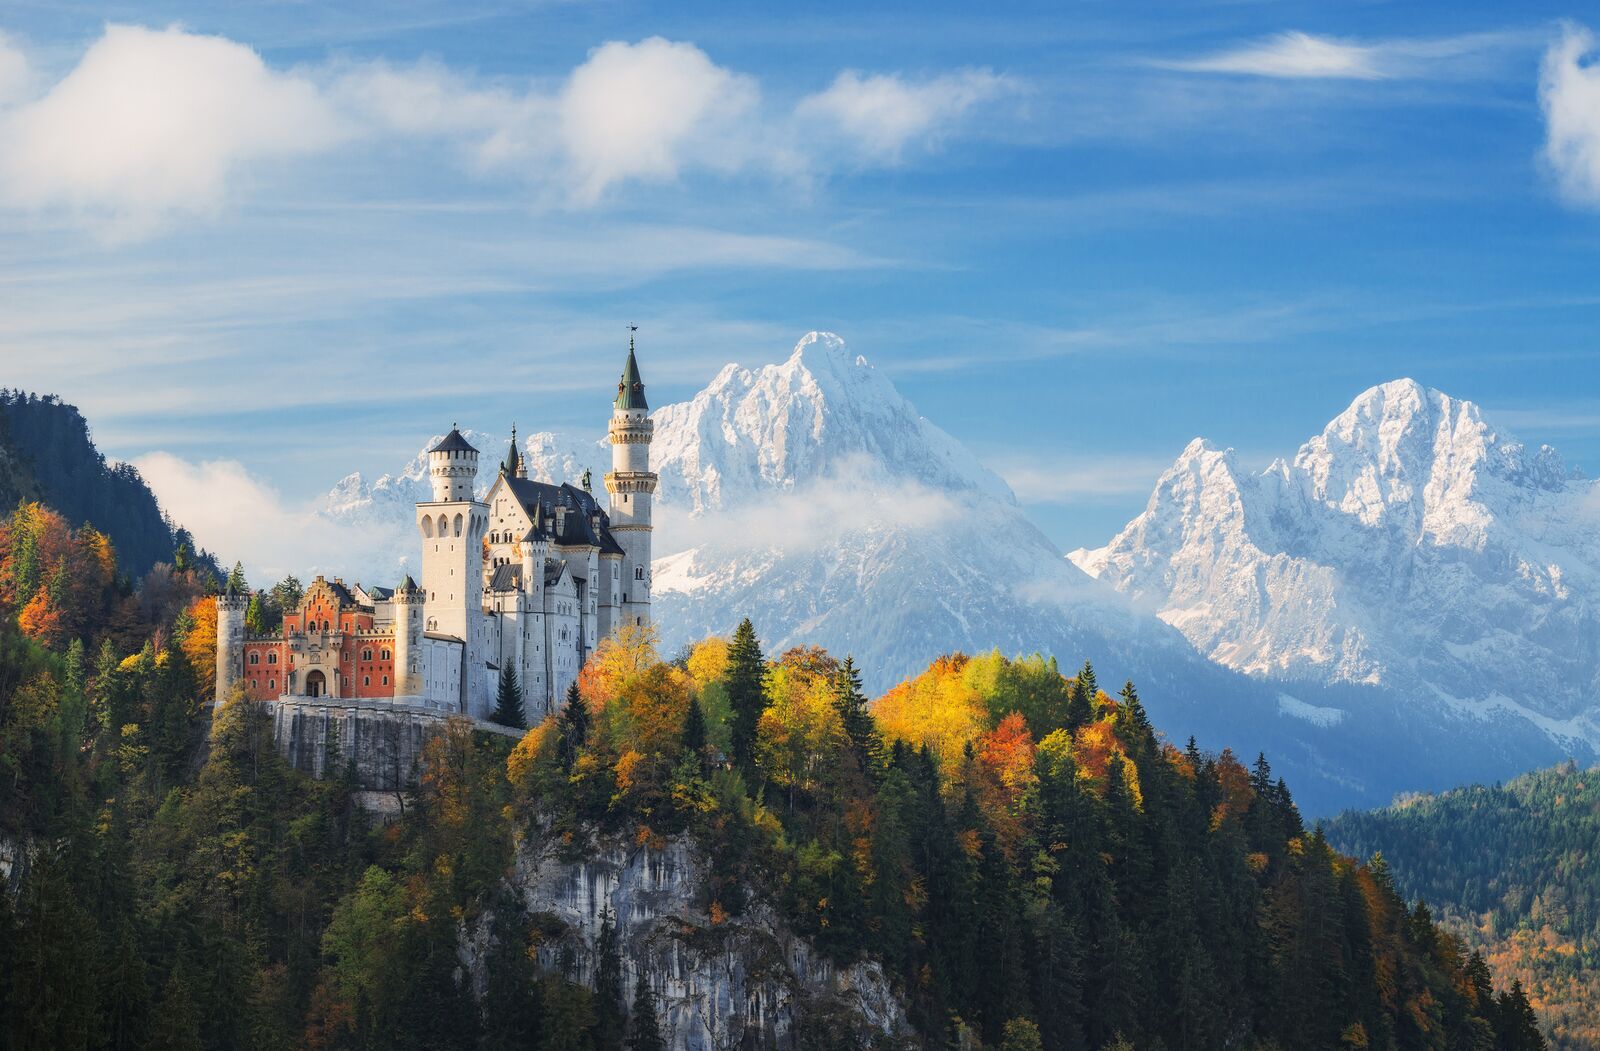 Germany. The famous Neuschwanstein Castle in the background of snowy mountains and trees with yellow and green leaves.